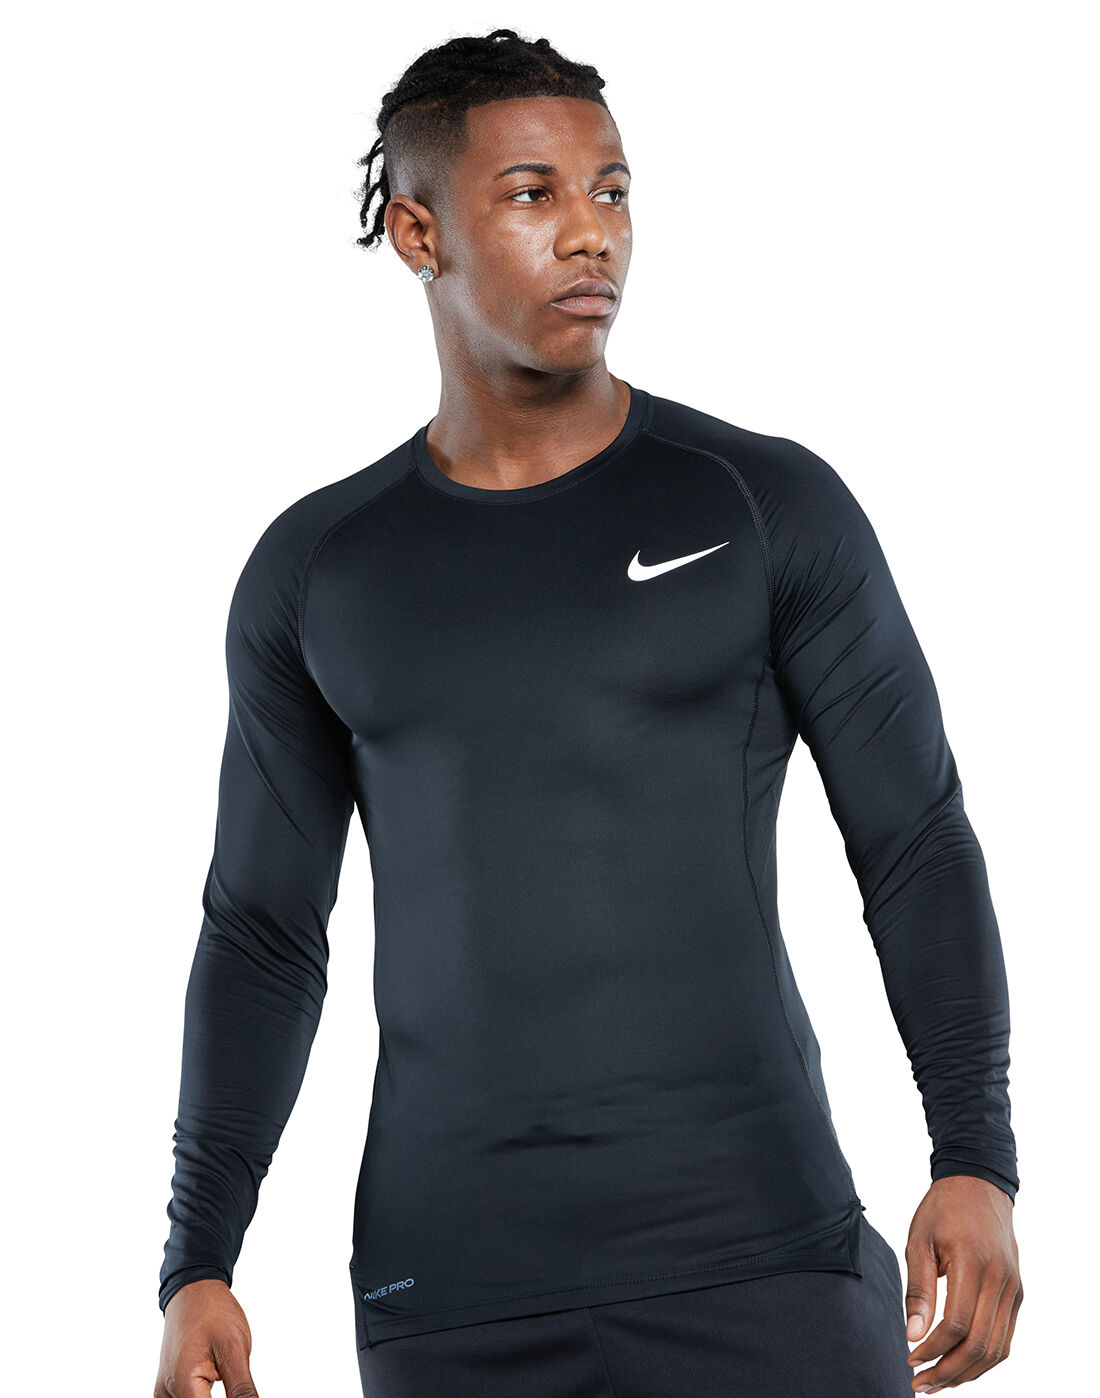 nike red base layer,www.npssonipat.com